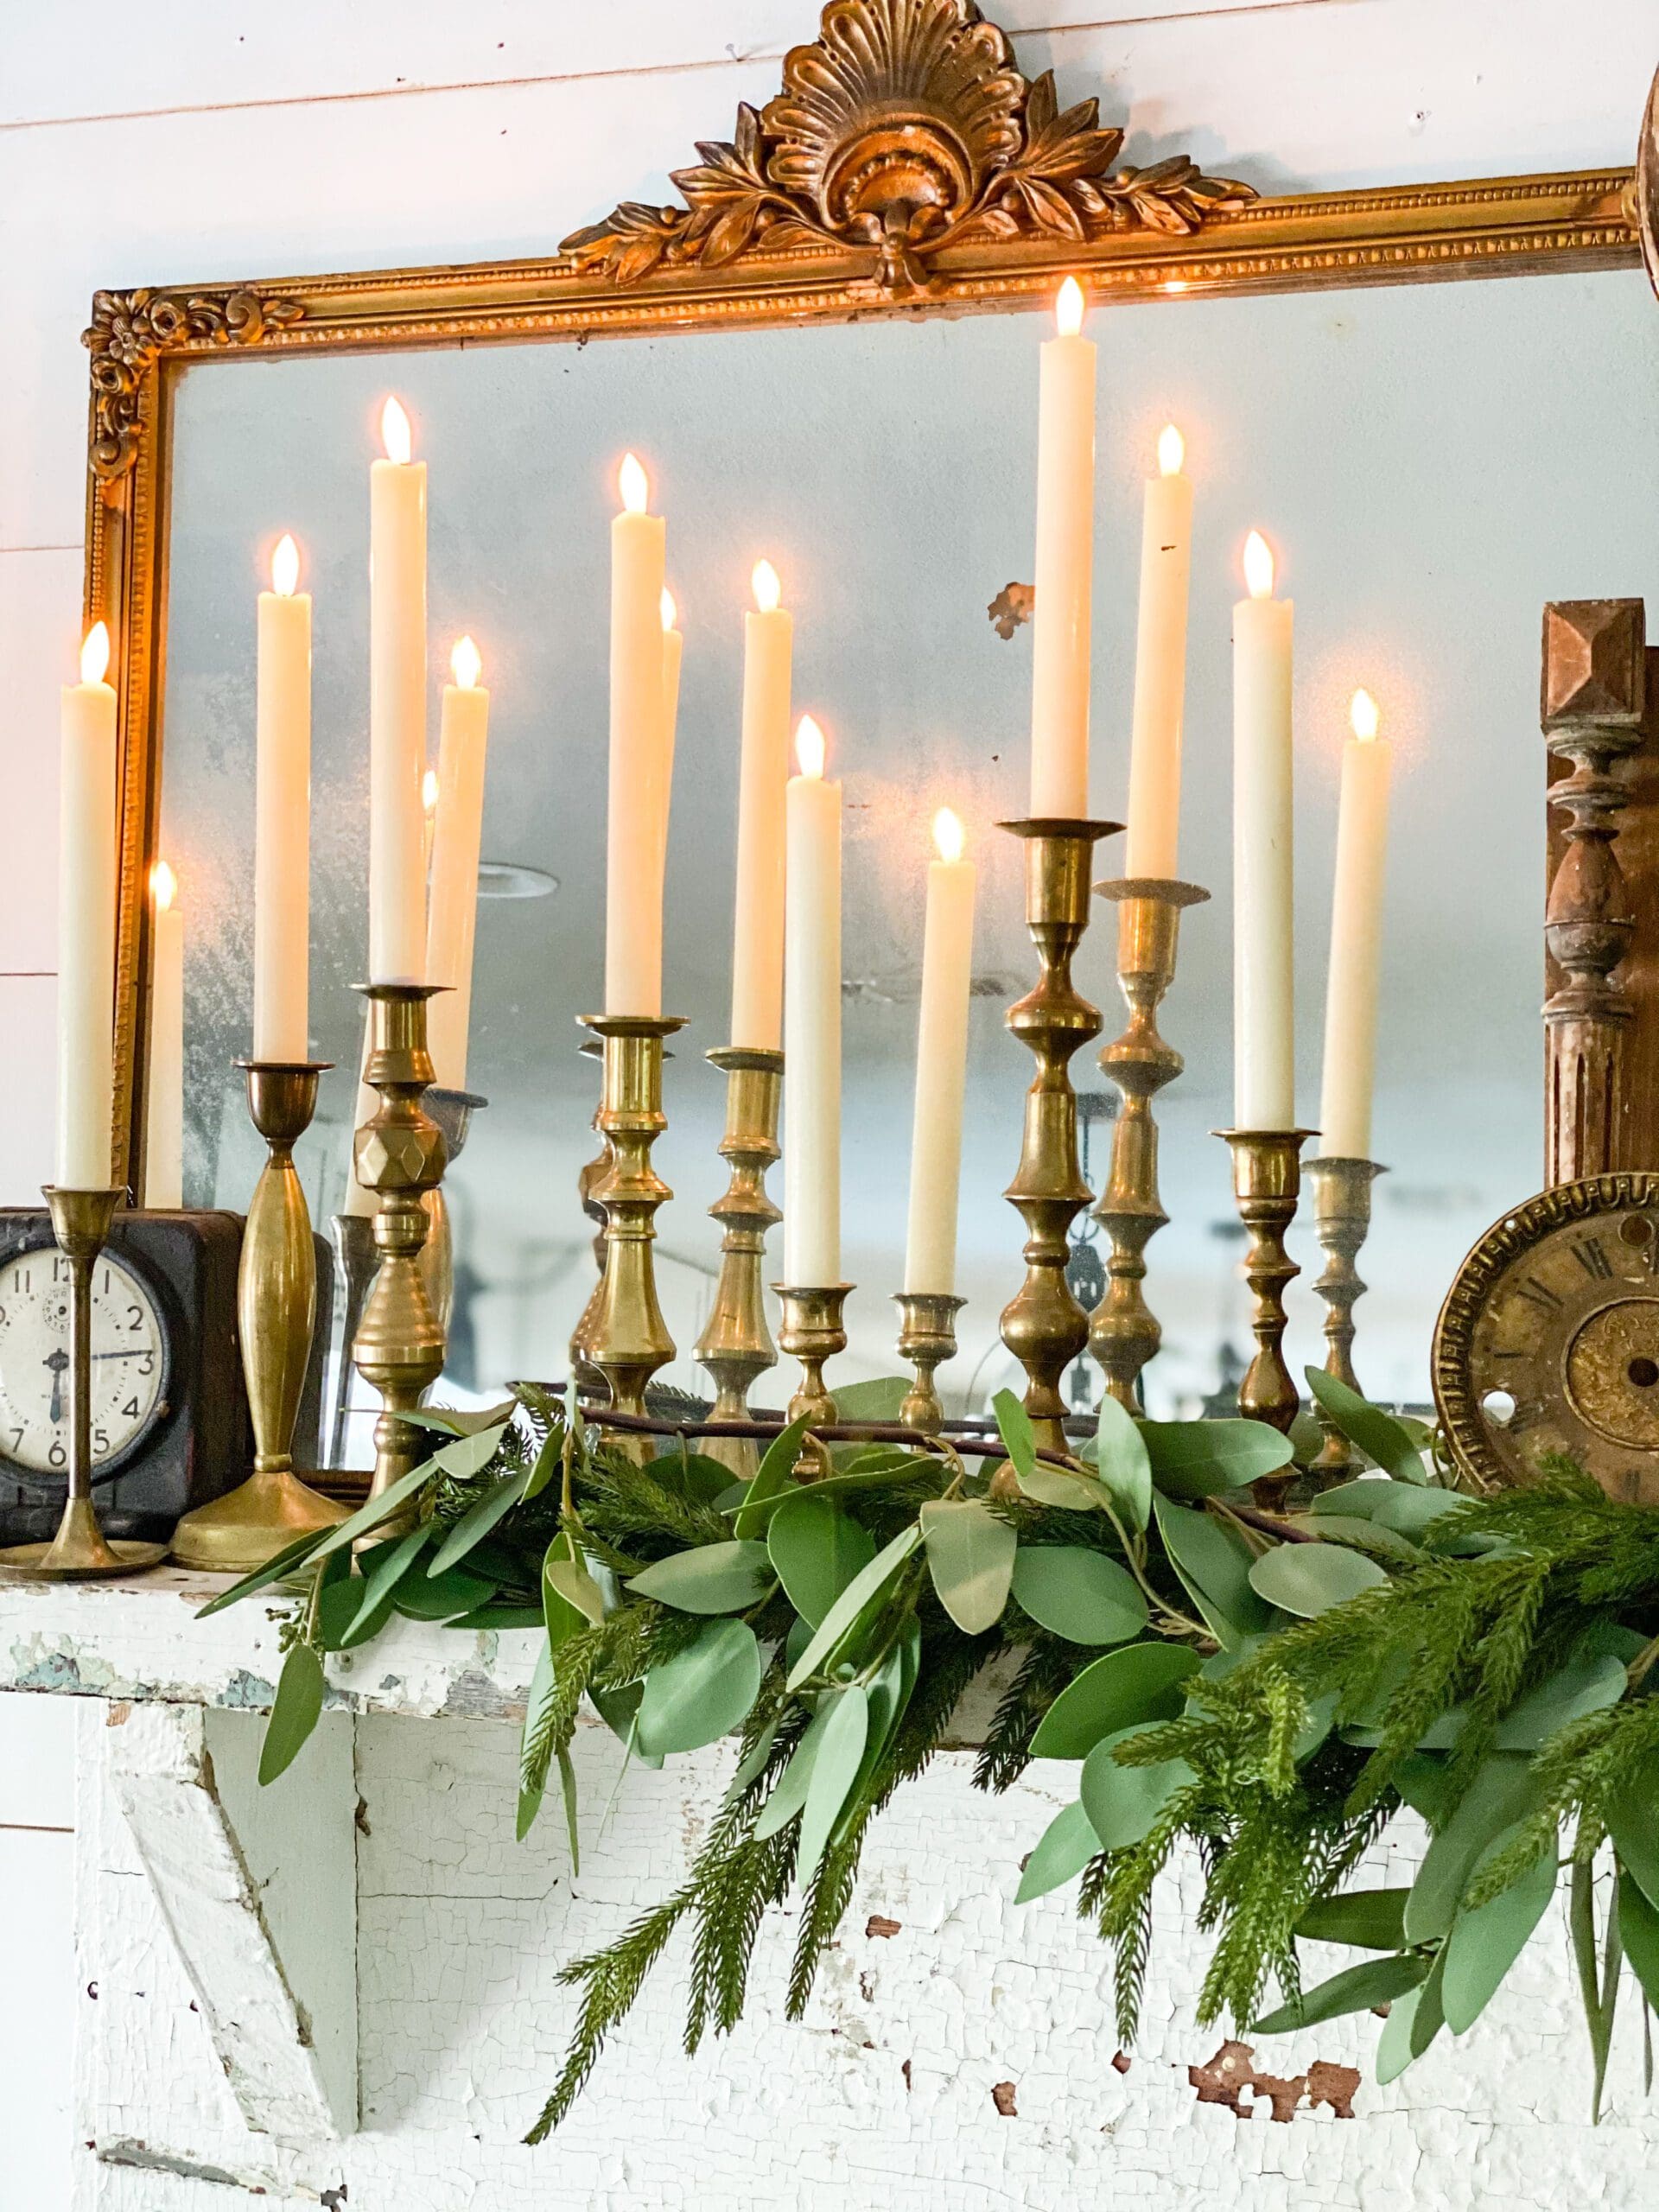 brass candlesticks holding flameless candles reflected in a vintage gold mirror